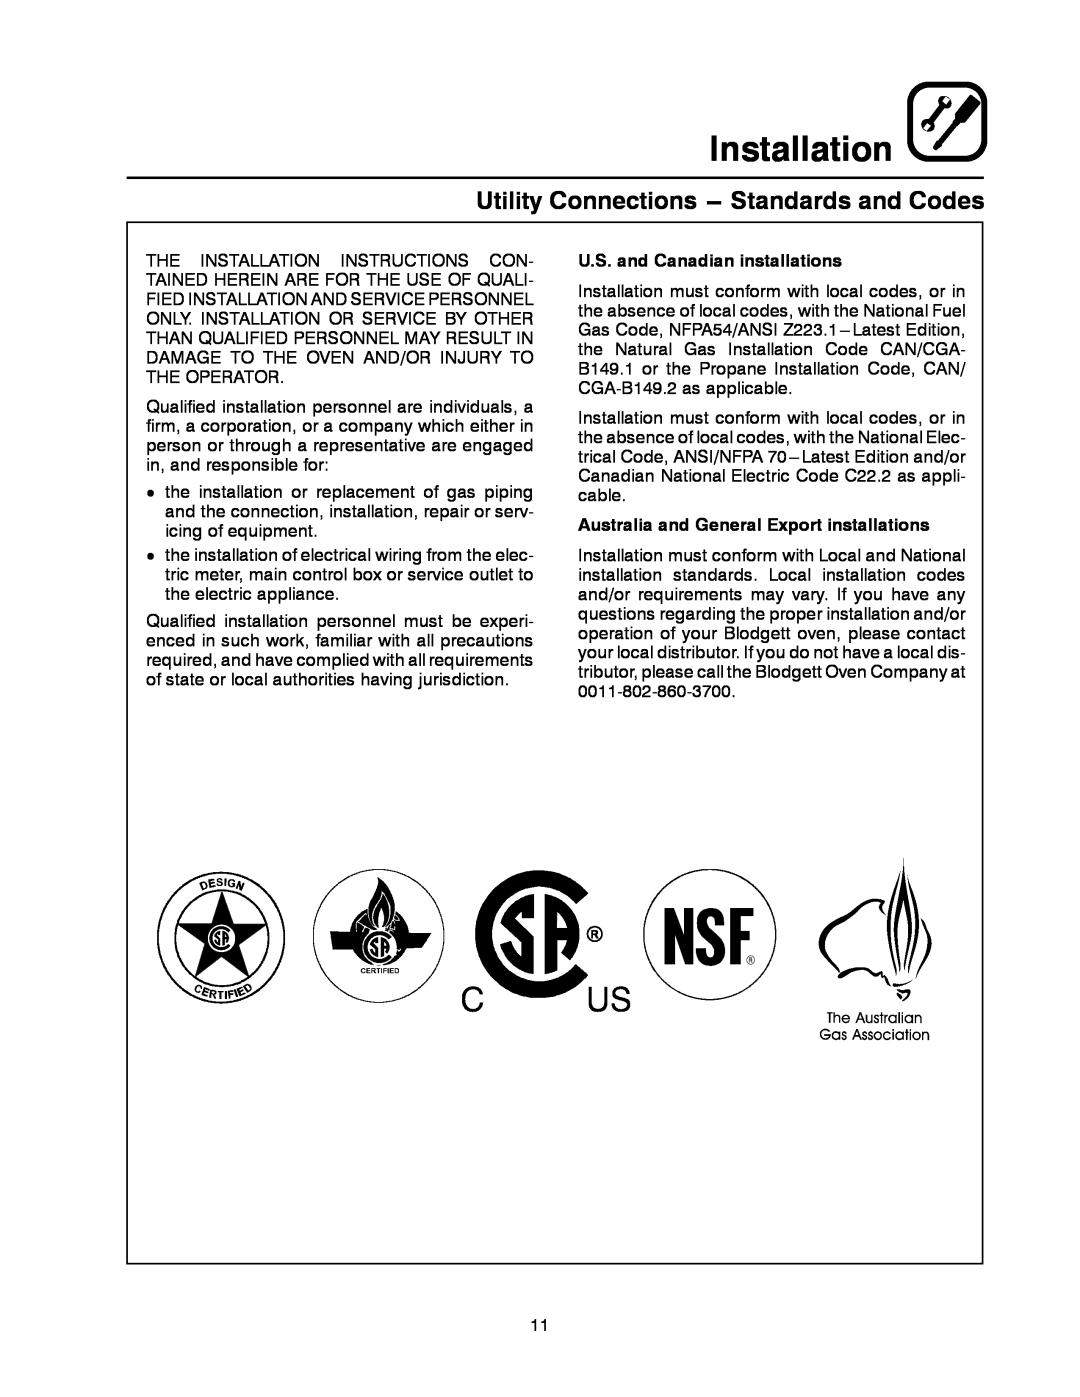 Blodgett DFG-50 manual Utility Connections --- Standards and Codes, Installation, U.S. and Canadian installations 